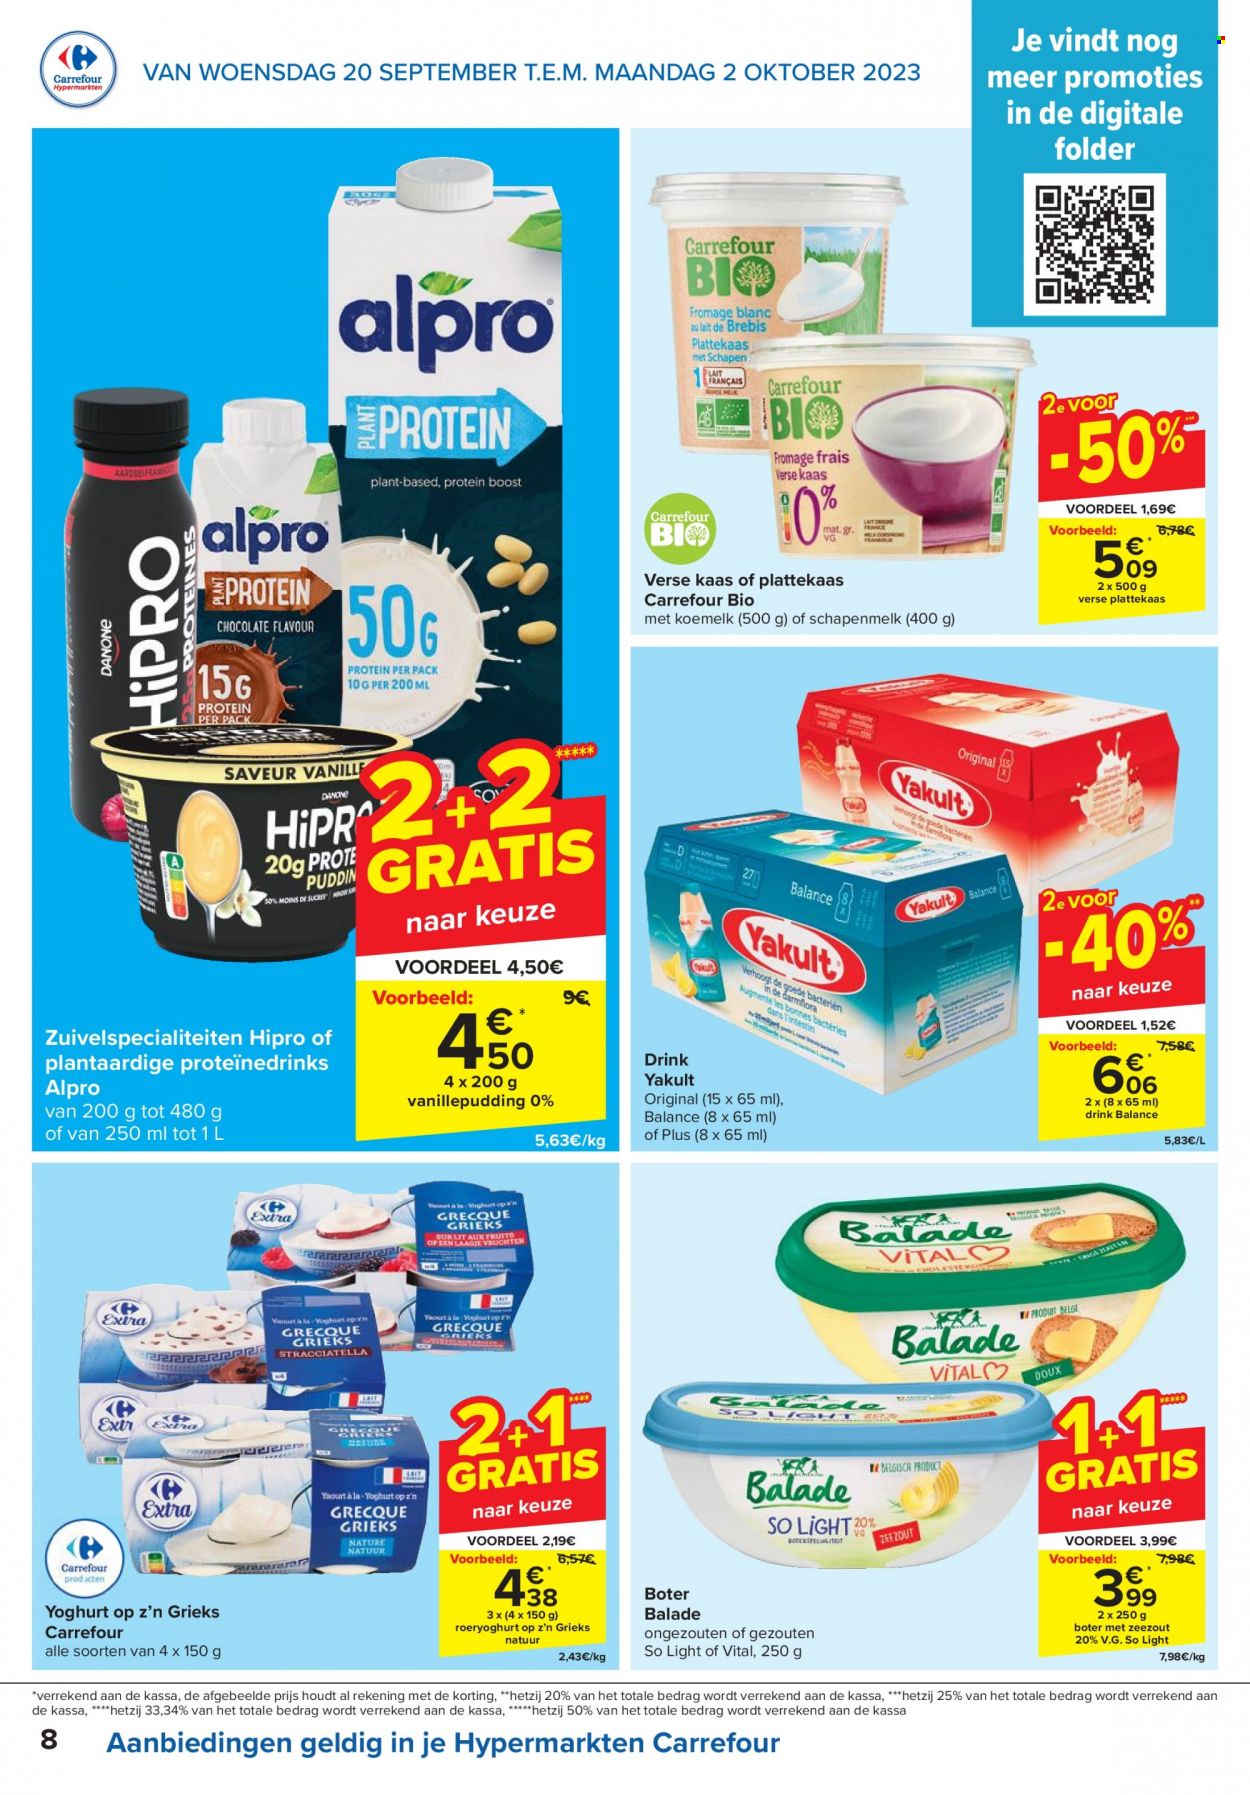 Catalogue Carrefour hypermarkt - 20.9.2023 - 2.10.2023. Page 8.